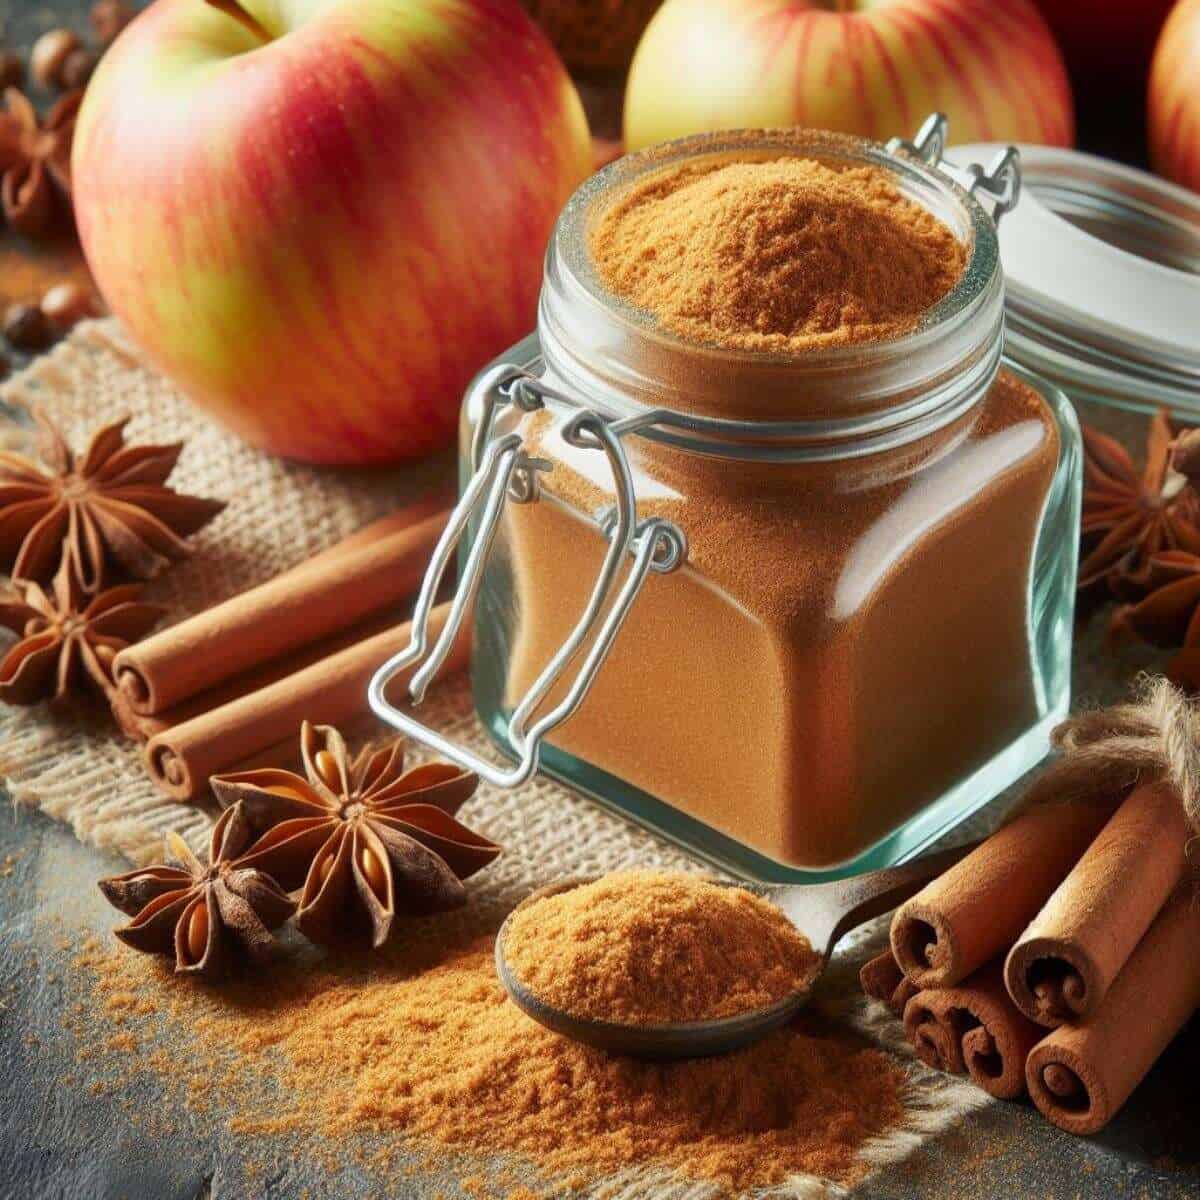 apple pie spice powder in a bottle with apples and cinamon